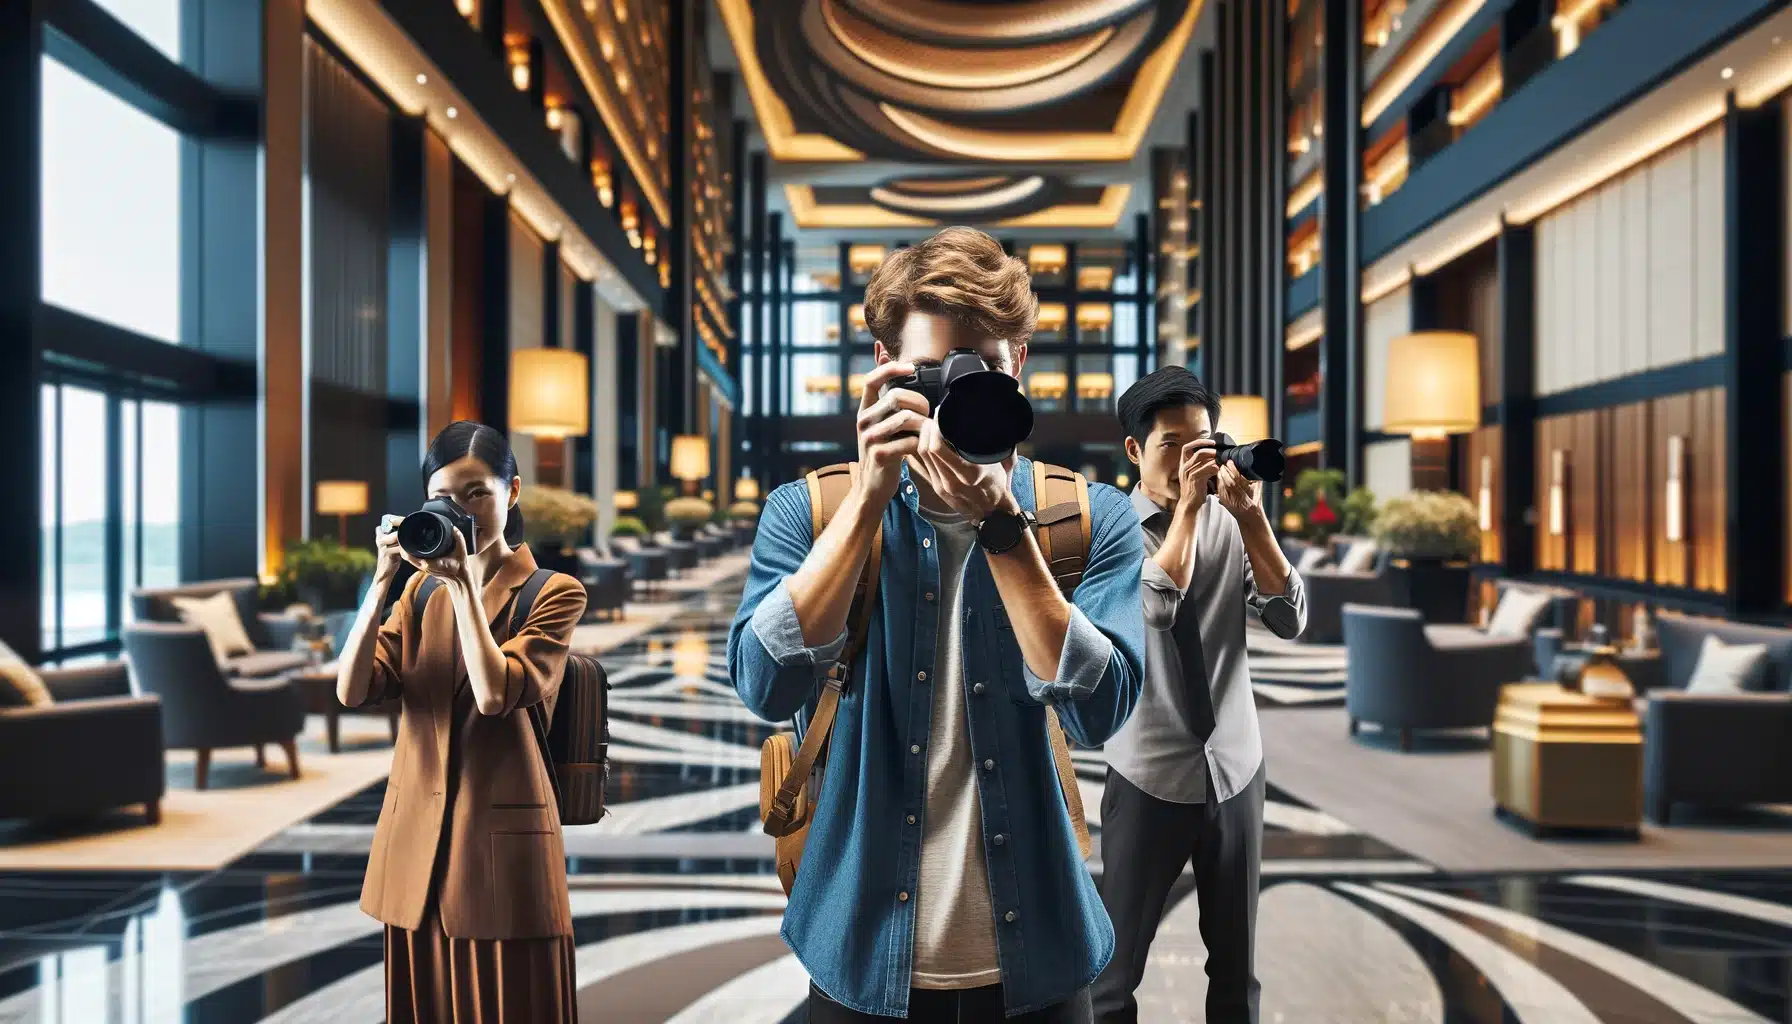 Three photographers—a Caucasian male focusing on architectural details, an African American female capturing artistic decor, and an Asian male photographing ambient lighting in a hotel lobby—demonstrate depth of field, showcasing variations in focal length, aperture size, and focus distance.